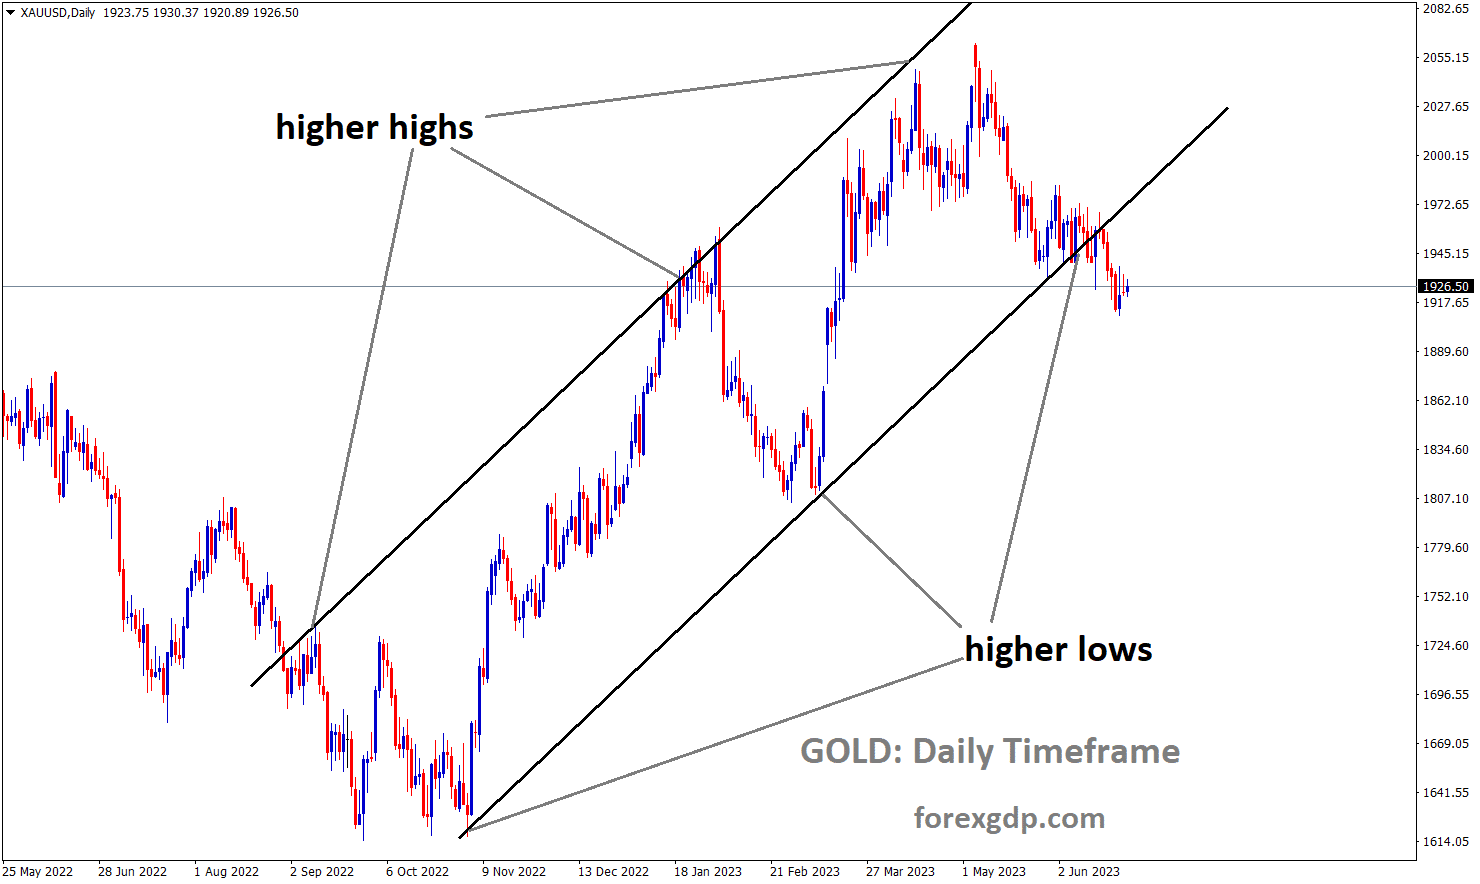 XAUUSD Gold Price is moving in an Ascending channel and the market has reached the higher low area of the channel 4